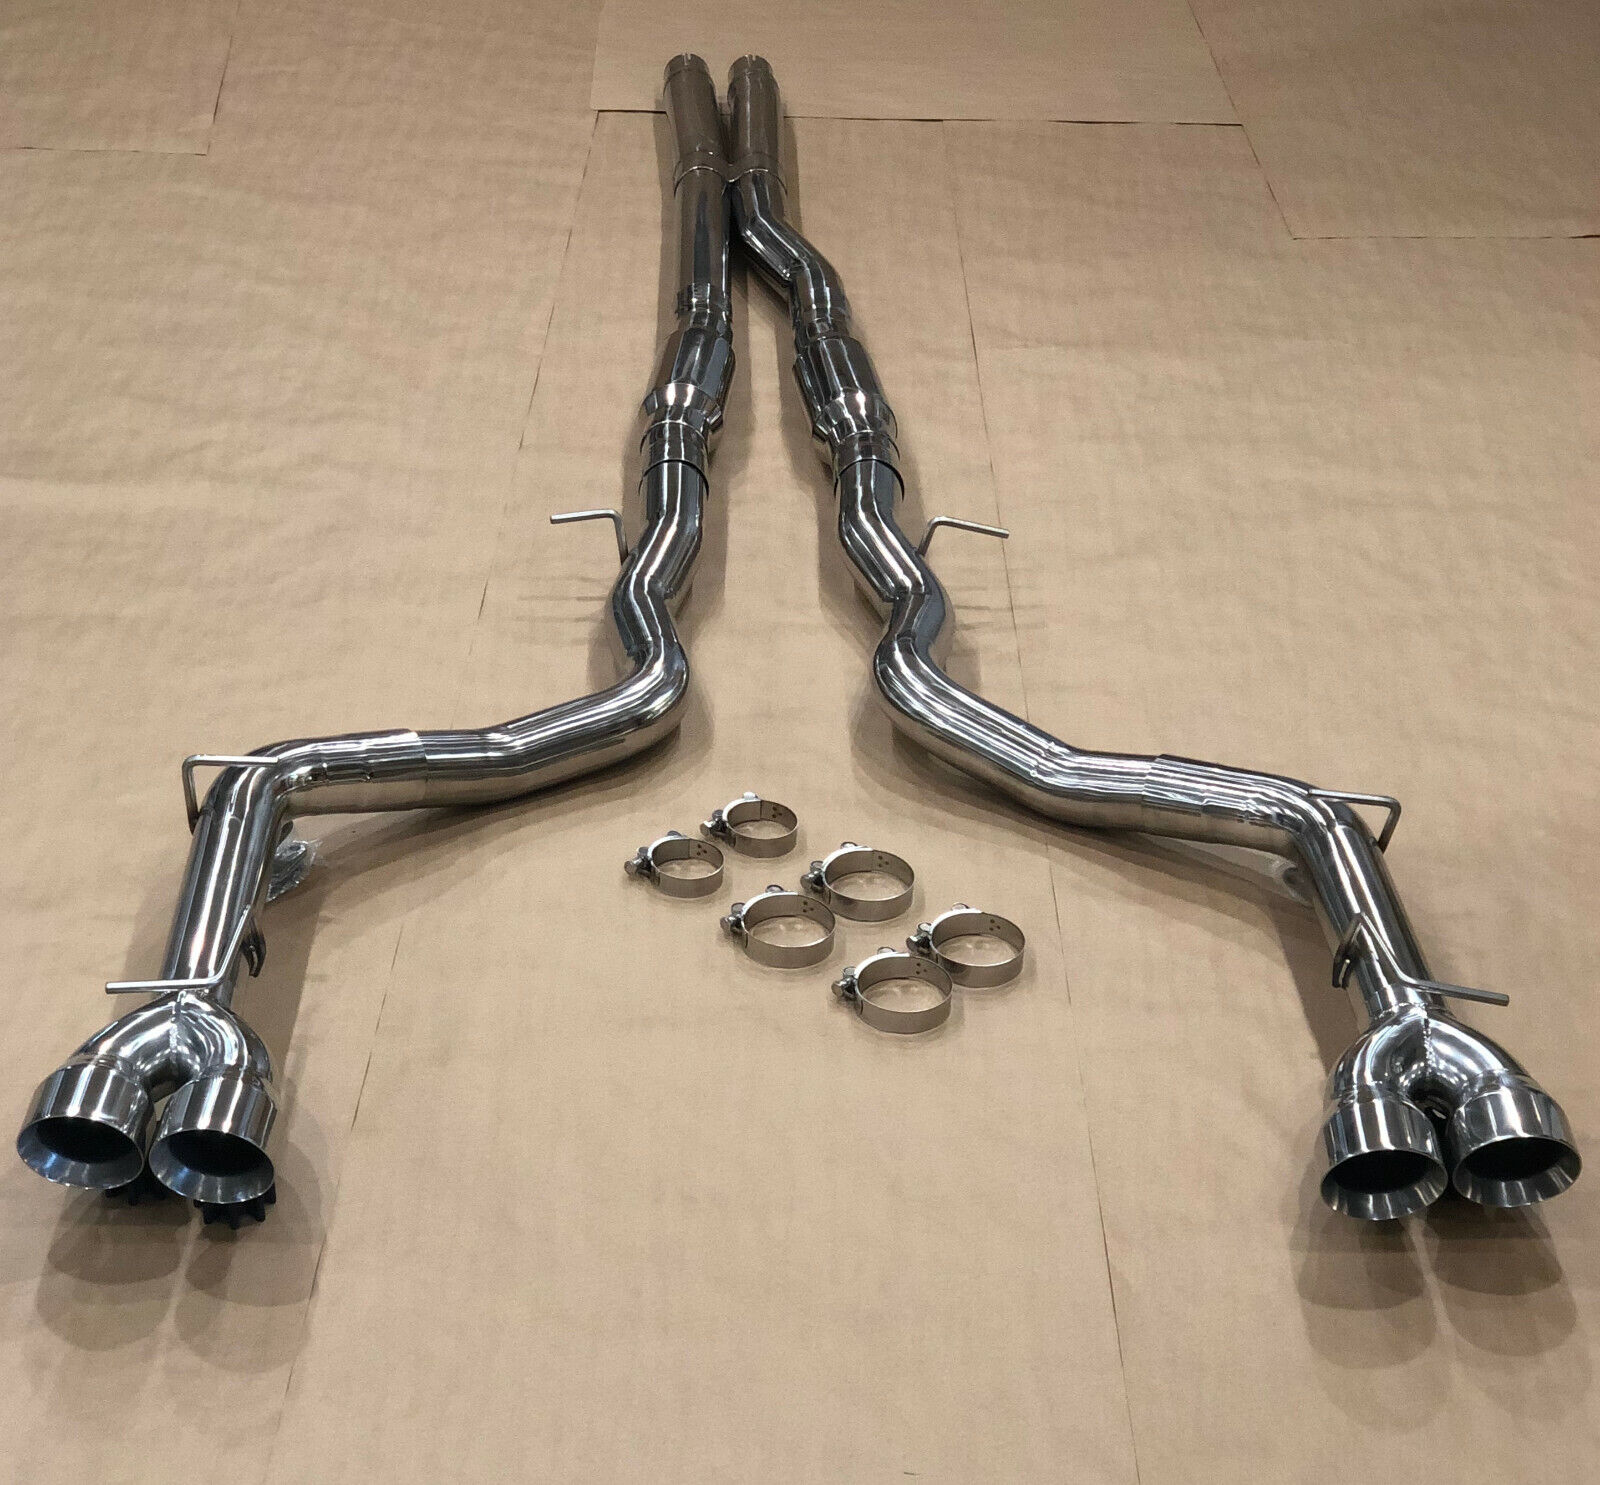 05-10 FOR Dodge Charger RT Exhaust System Stainless Steel RACE Cat-back W/ TIPS